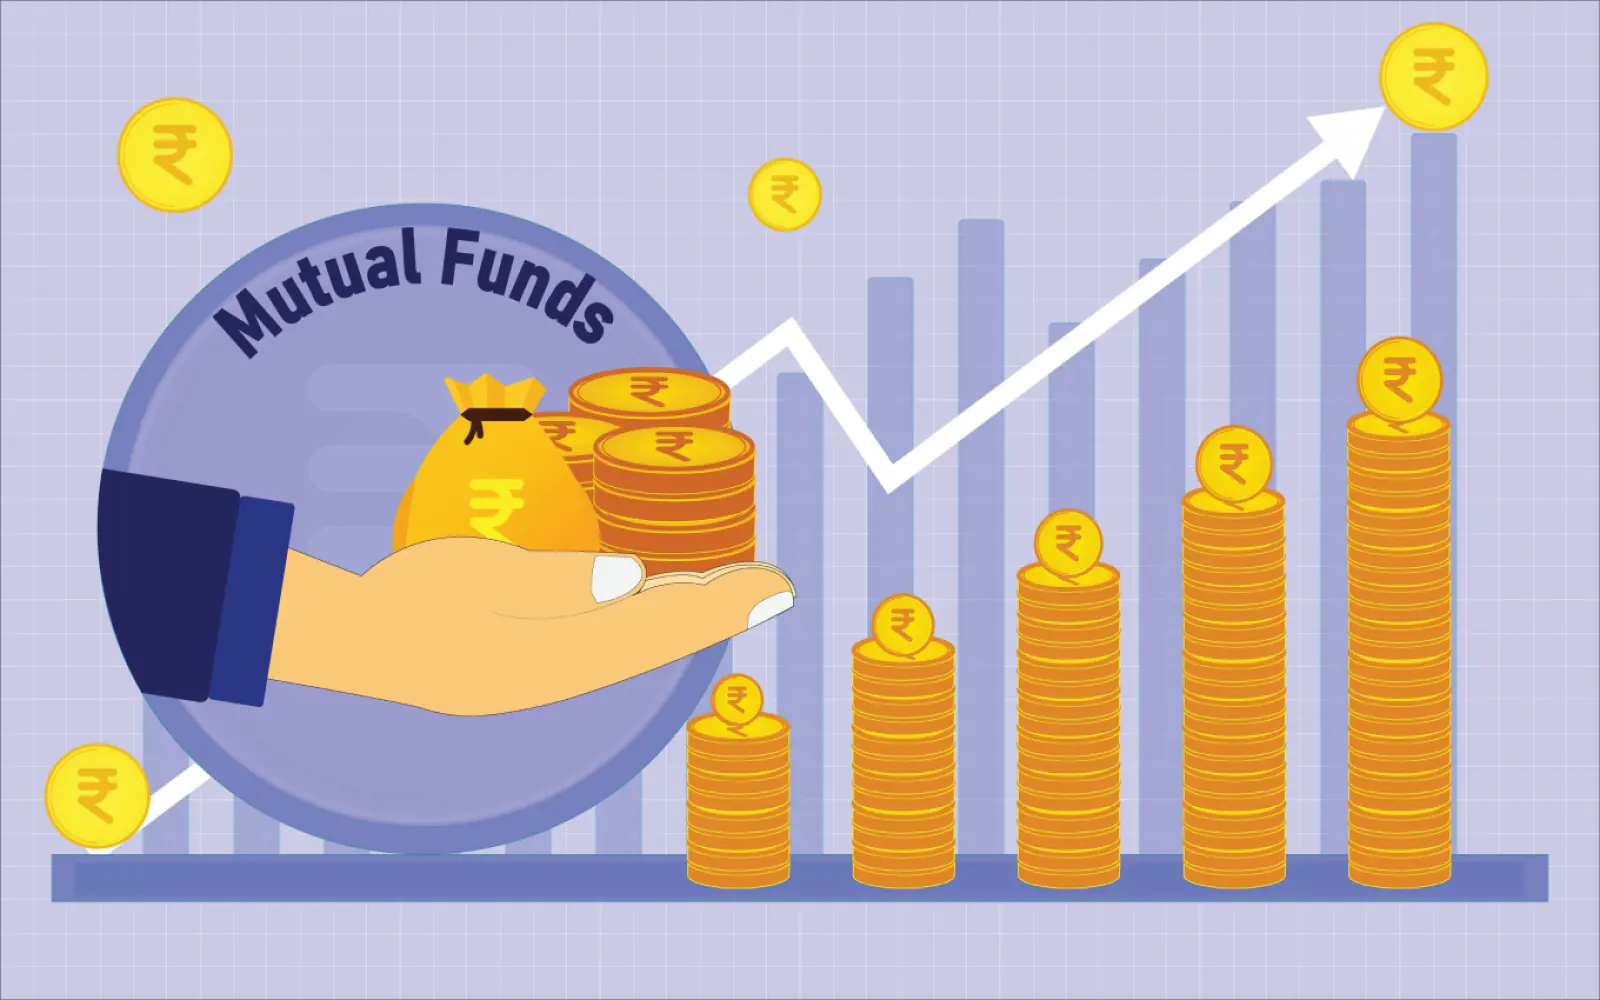 Investment Mantra: SIP offers cheaper mutual fund units and is a better option for mid- and small-cap stocks